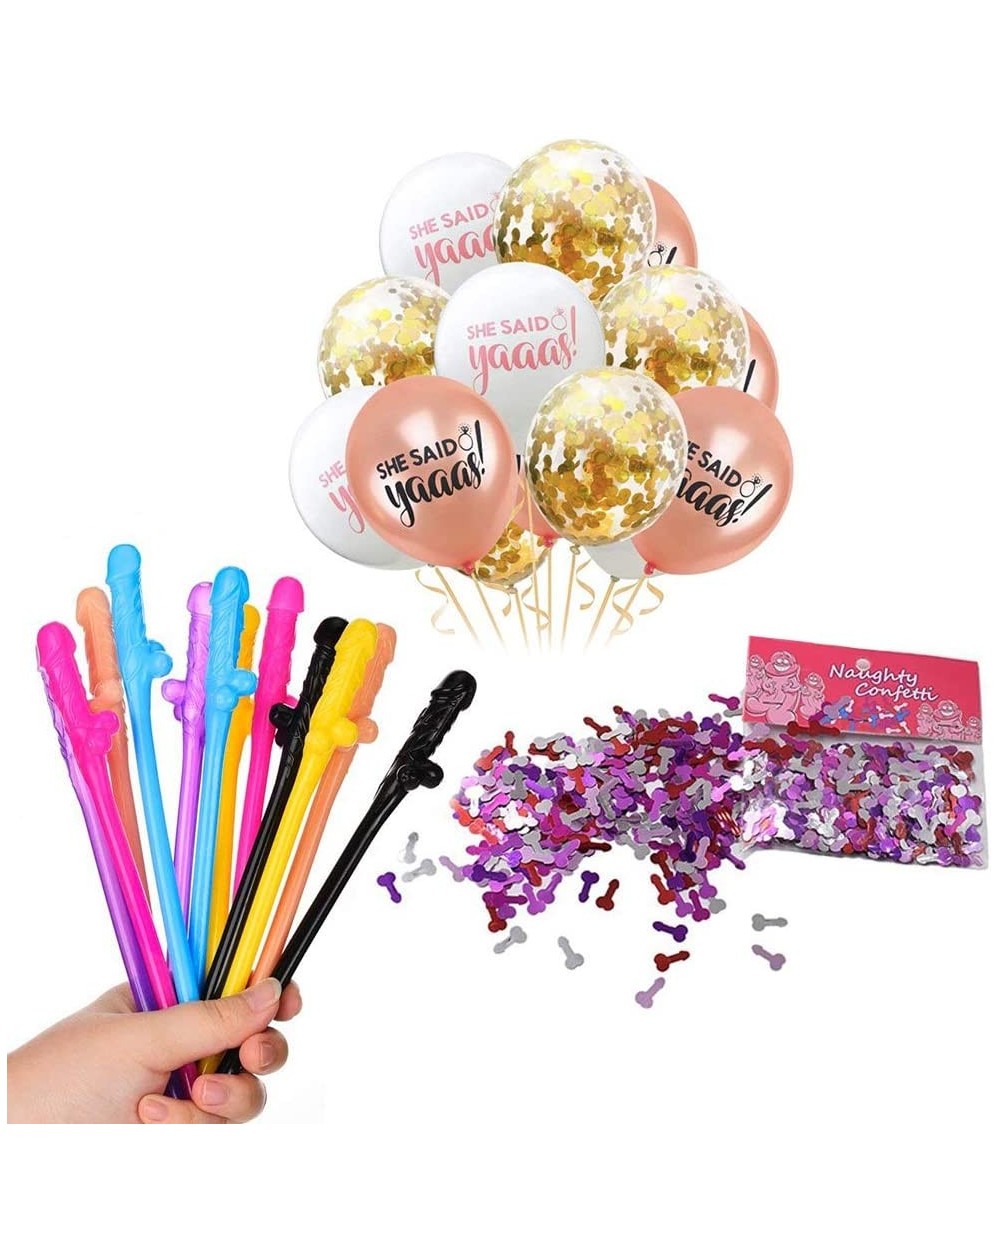 Adult Novelty Bachelorette Party Straws - 30pcs Girls Night Out Party Kit with She Said Yes Balloons- Funny Naughty Confetti ...